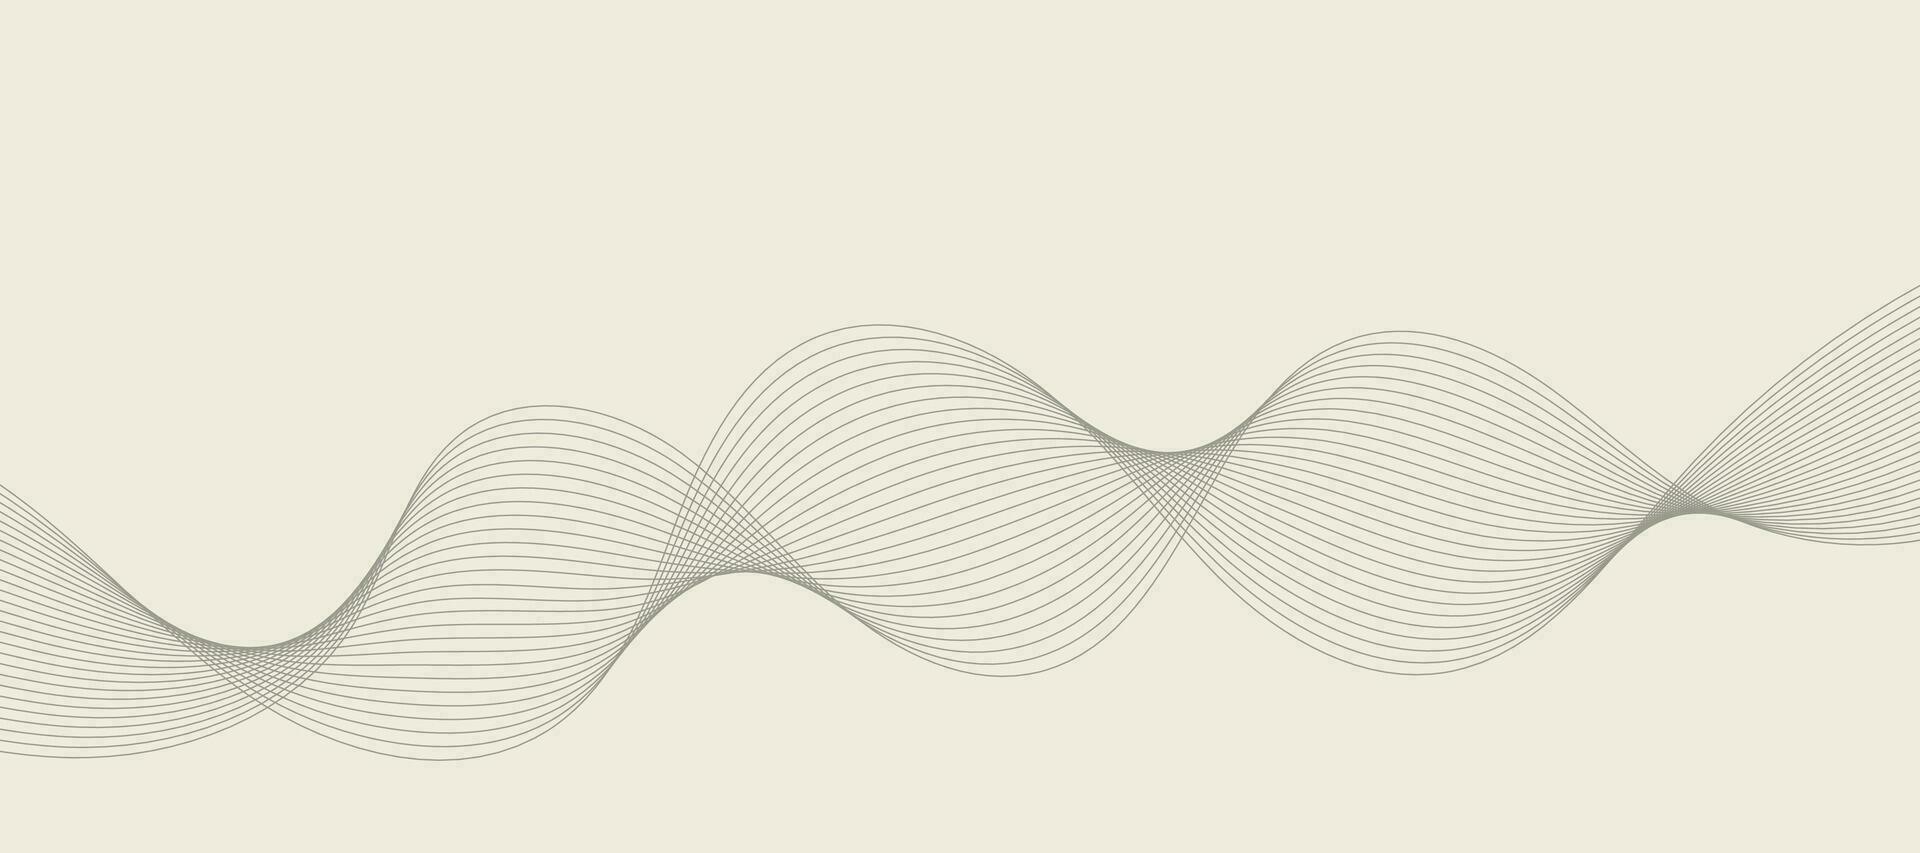 Abstract wave element for design. Digital frequency track equalizer. Stylized line art background. Vector illustration. Wave with lines created using blend tool. Curved Wavy Line, Smooth Stripe.